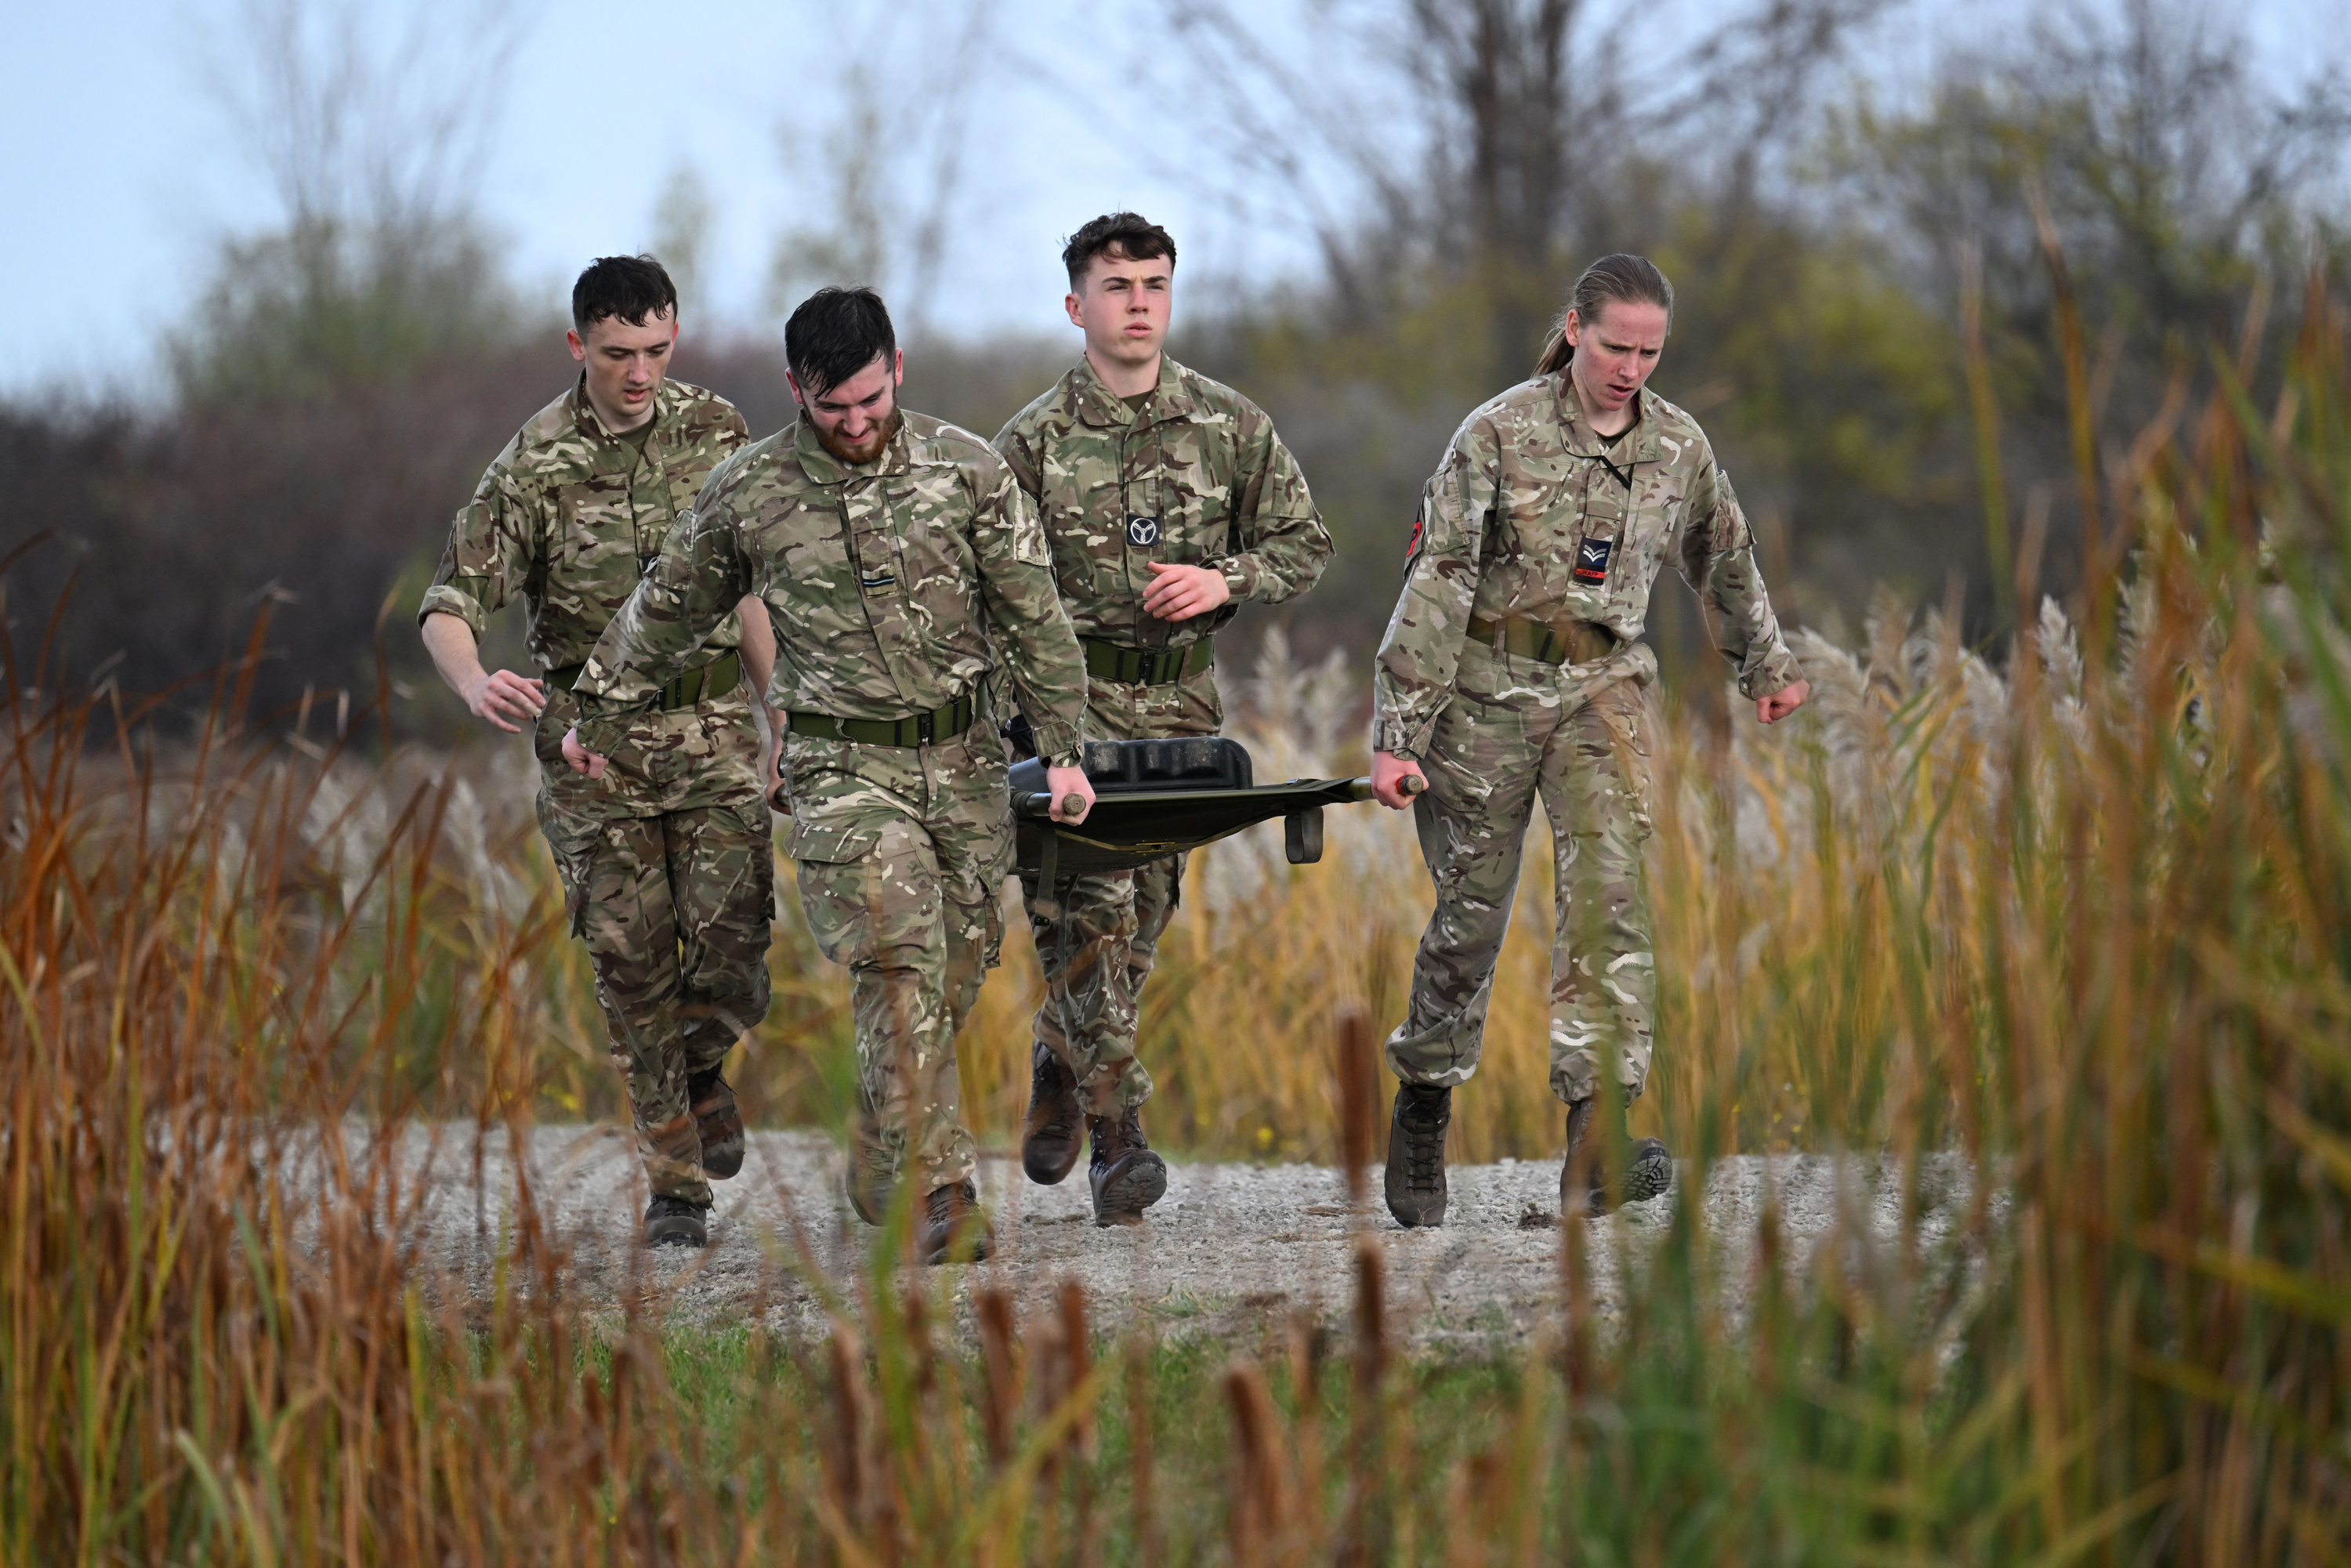 The RAF Wittering team compete in the gruelling casualty evacuation competition.